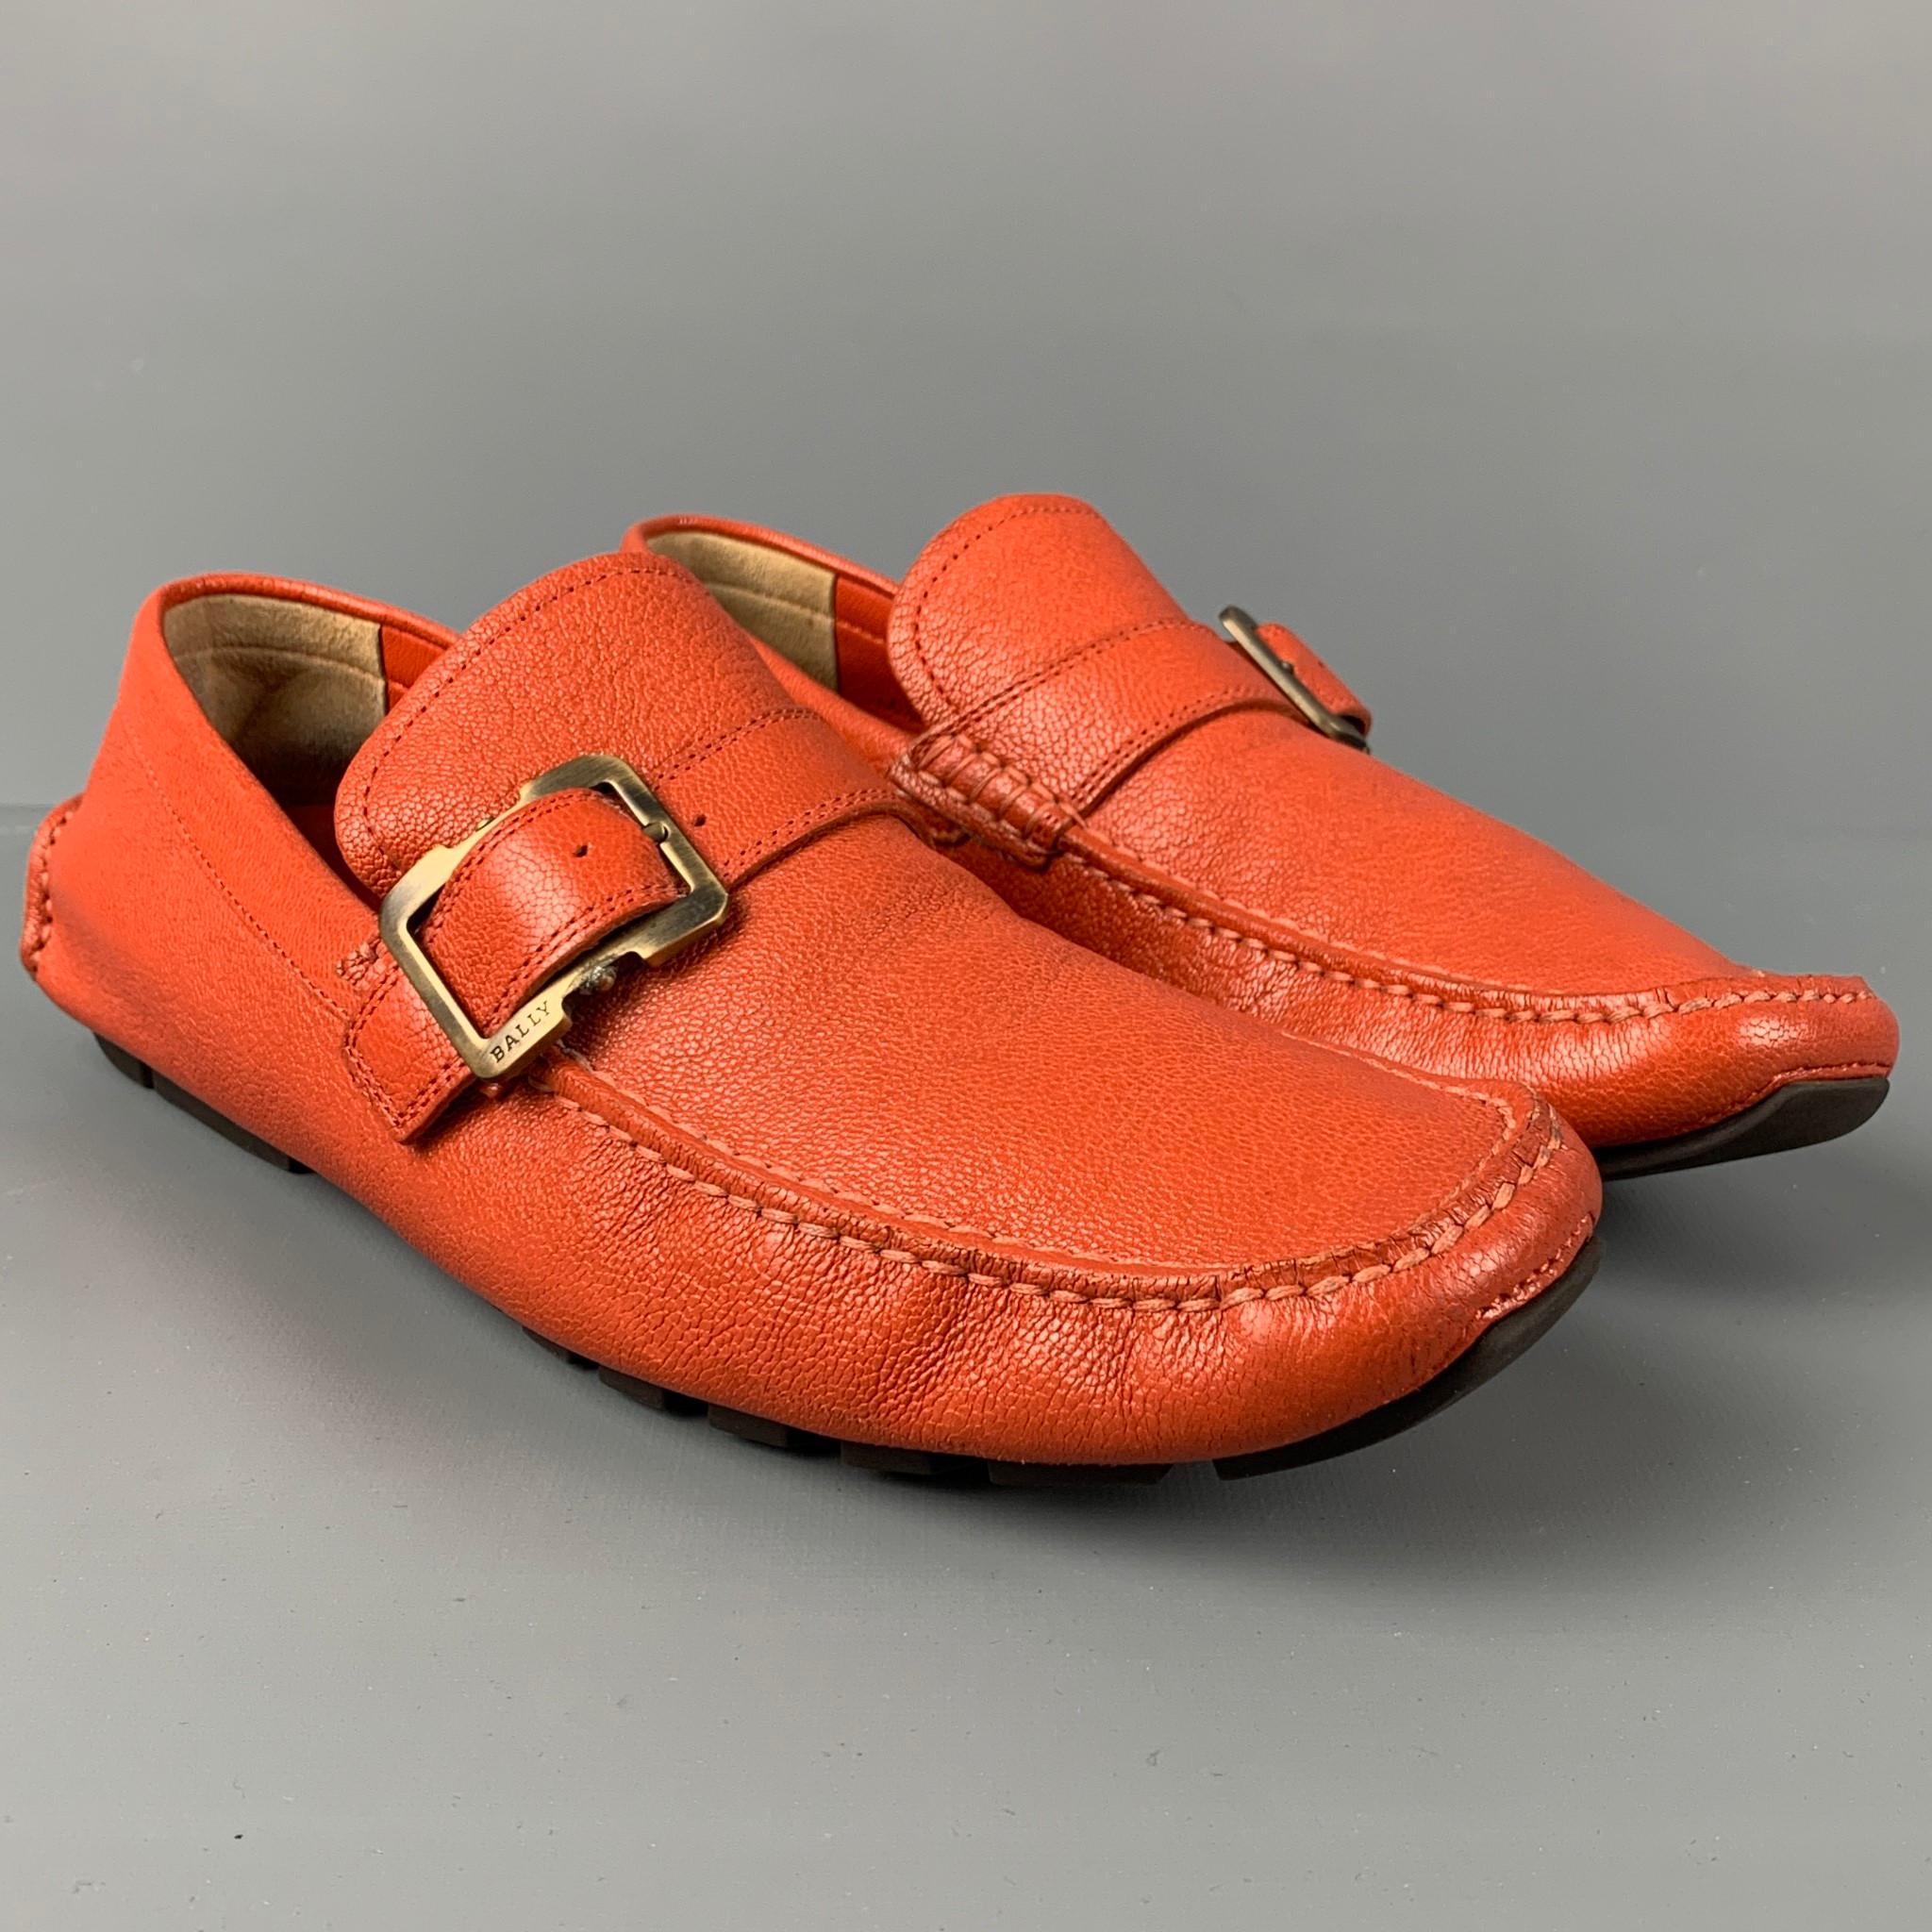 BALLY loafers comes in a orange leather featuring a drivers style, square toe, and a buckle strap detail. 

Very Good Pre-Owned Condition.
Marked: EU 6.5 E / US 7.5 D

Outsole: 11.5 in. x 4 in. 